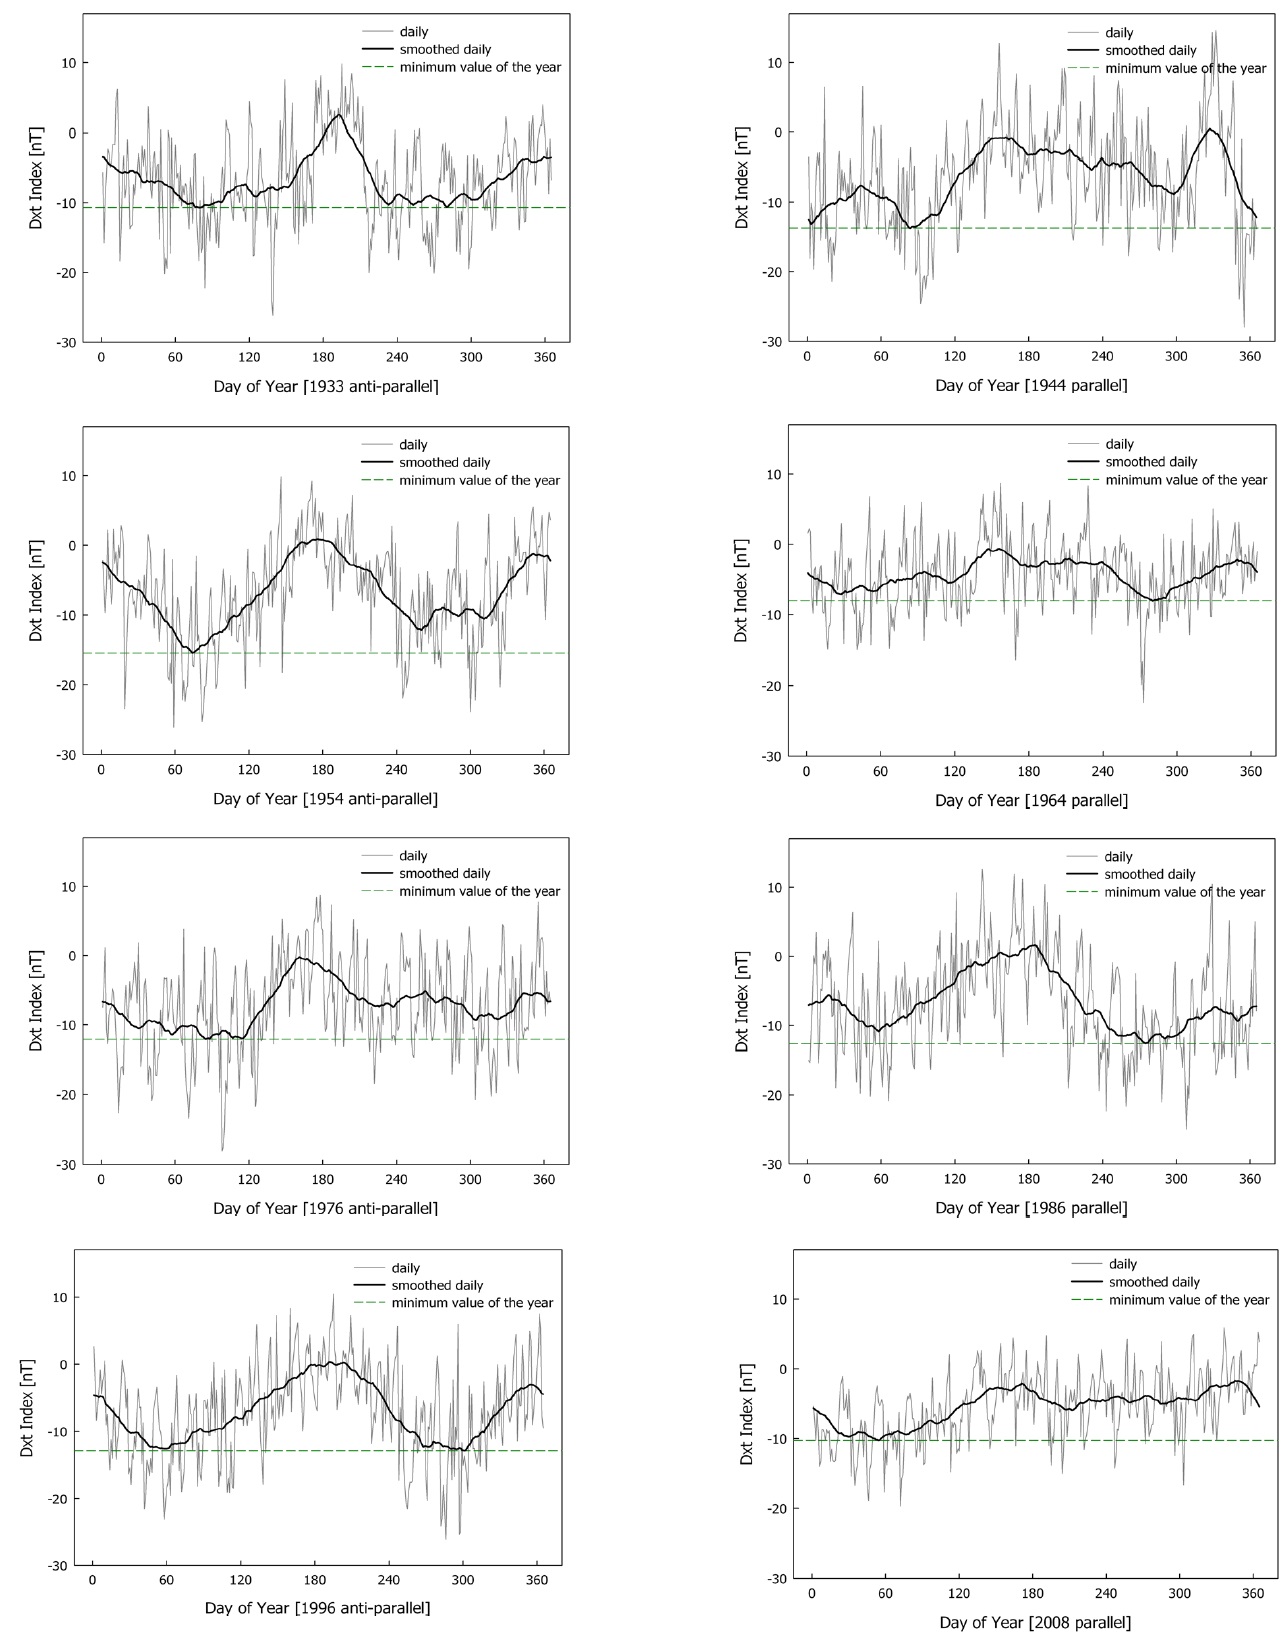 Daily profiles of Dxt indices for four solar cycles in anti-parallel periods (left) and four solar cycles in parallel periods (right).